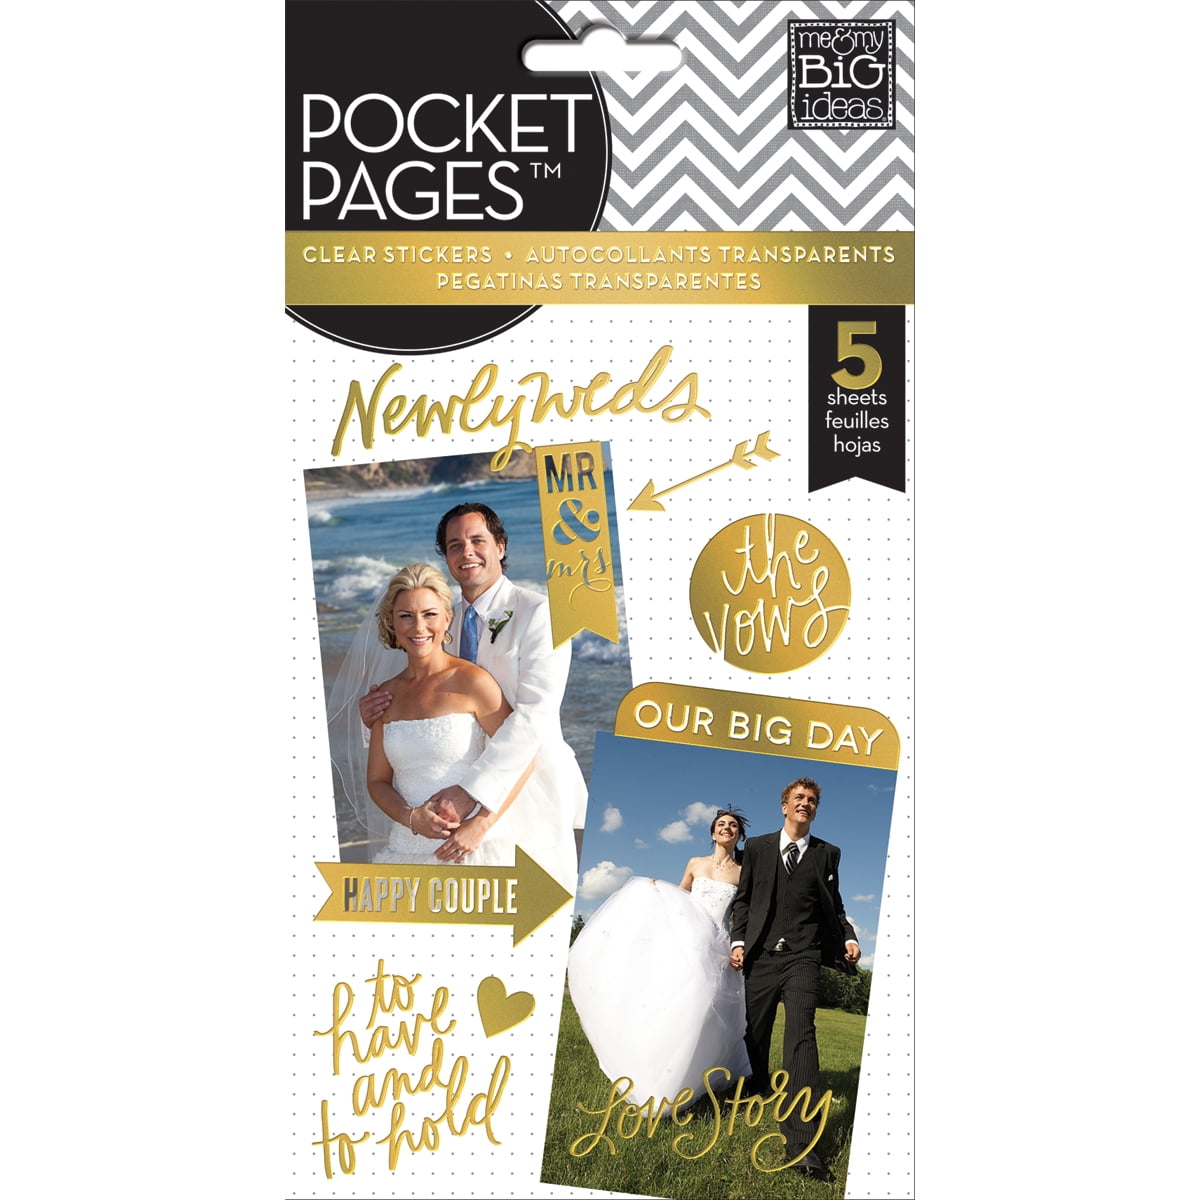 Wedding Stickers Scrapbook Album Pack - Bridal Sticker Bundle with 10 Sheets of Just Married Stickers for Brides, Grooms, Guests Wedding Party Fav